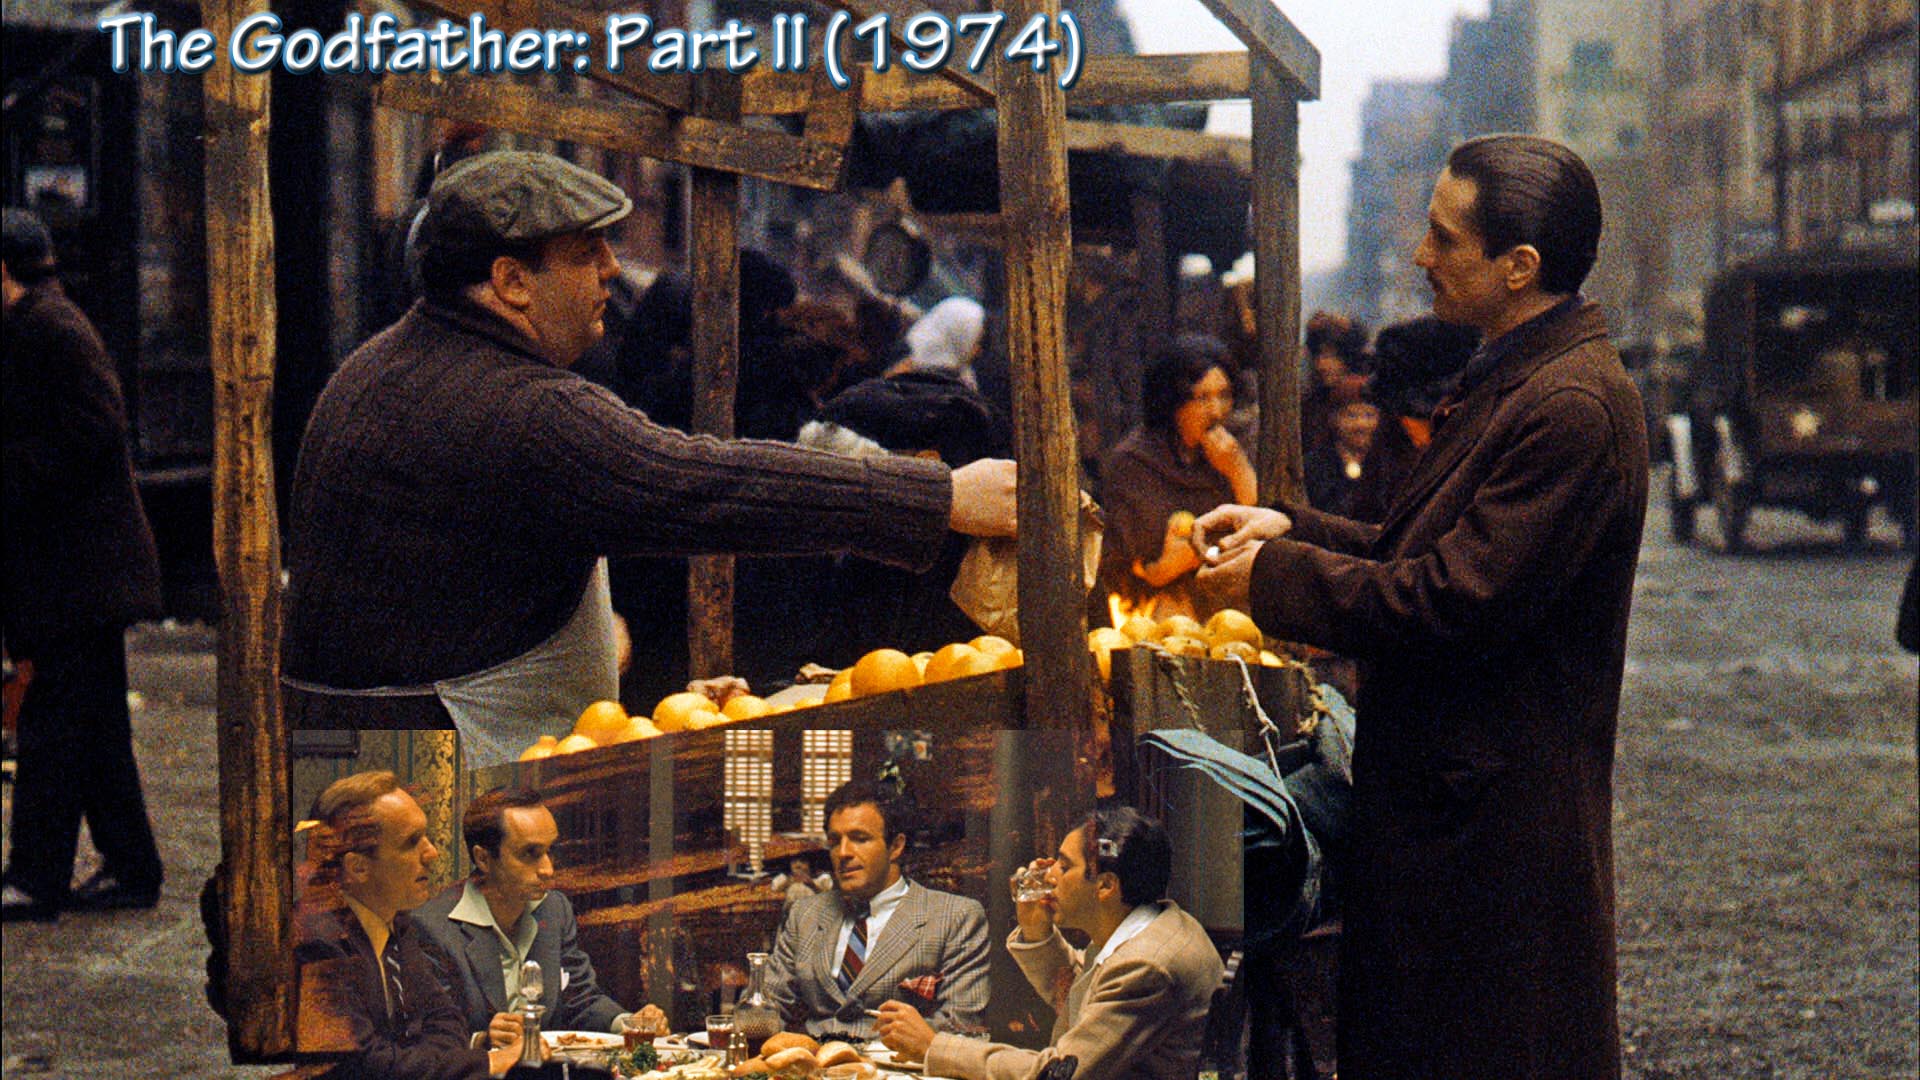 The Godfather Part II 1974 - Classic Movies Wallpaper 34307087